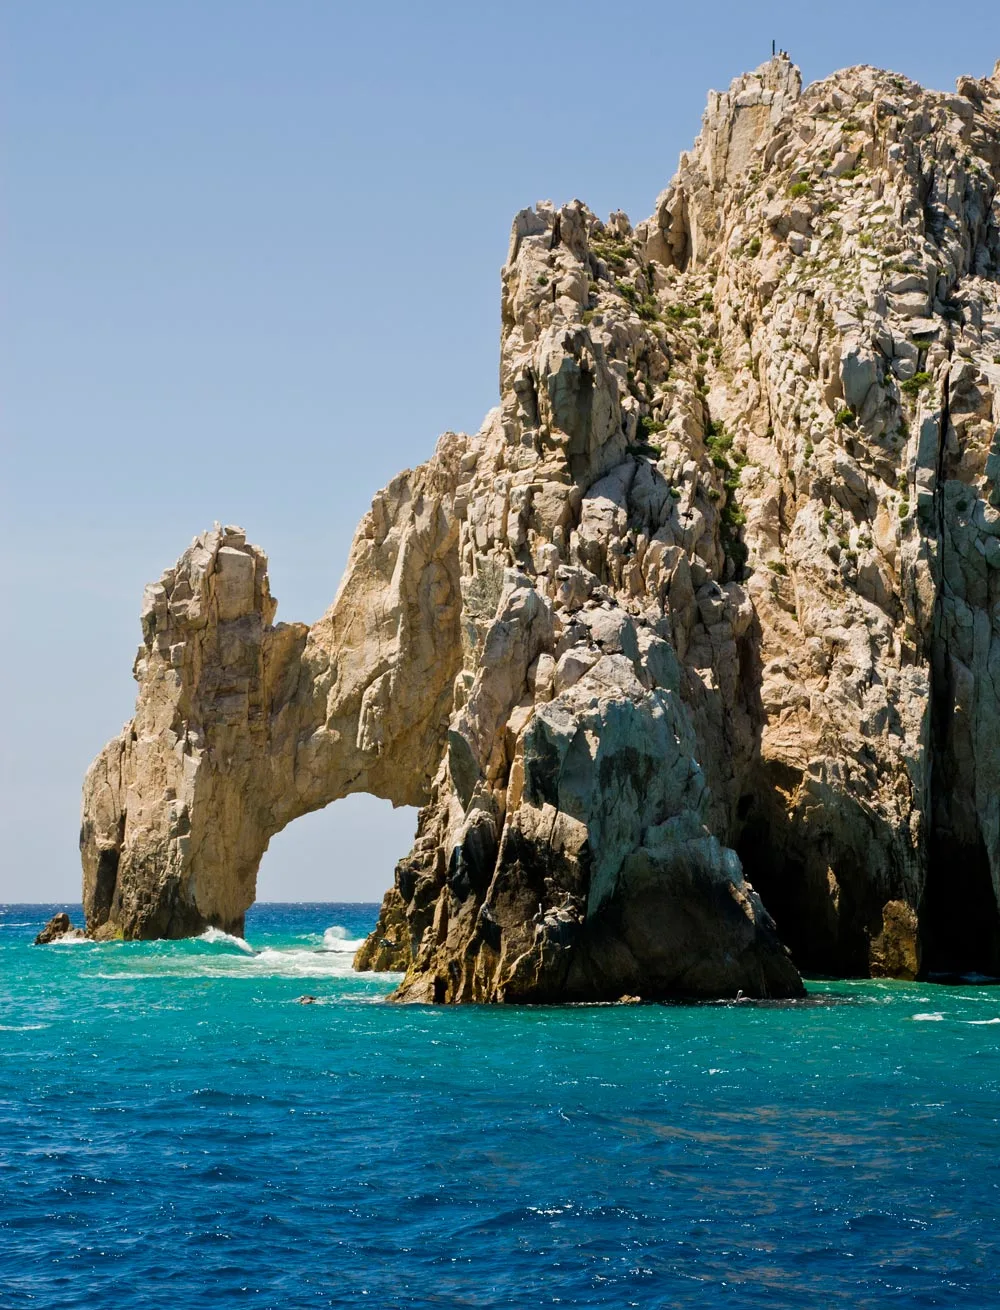 The three-story-high Arch is Cabo’s iconic landmark